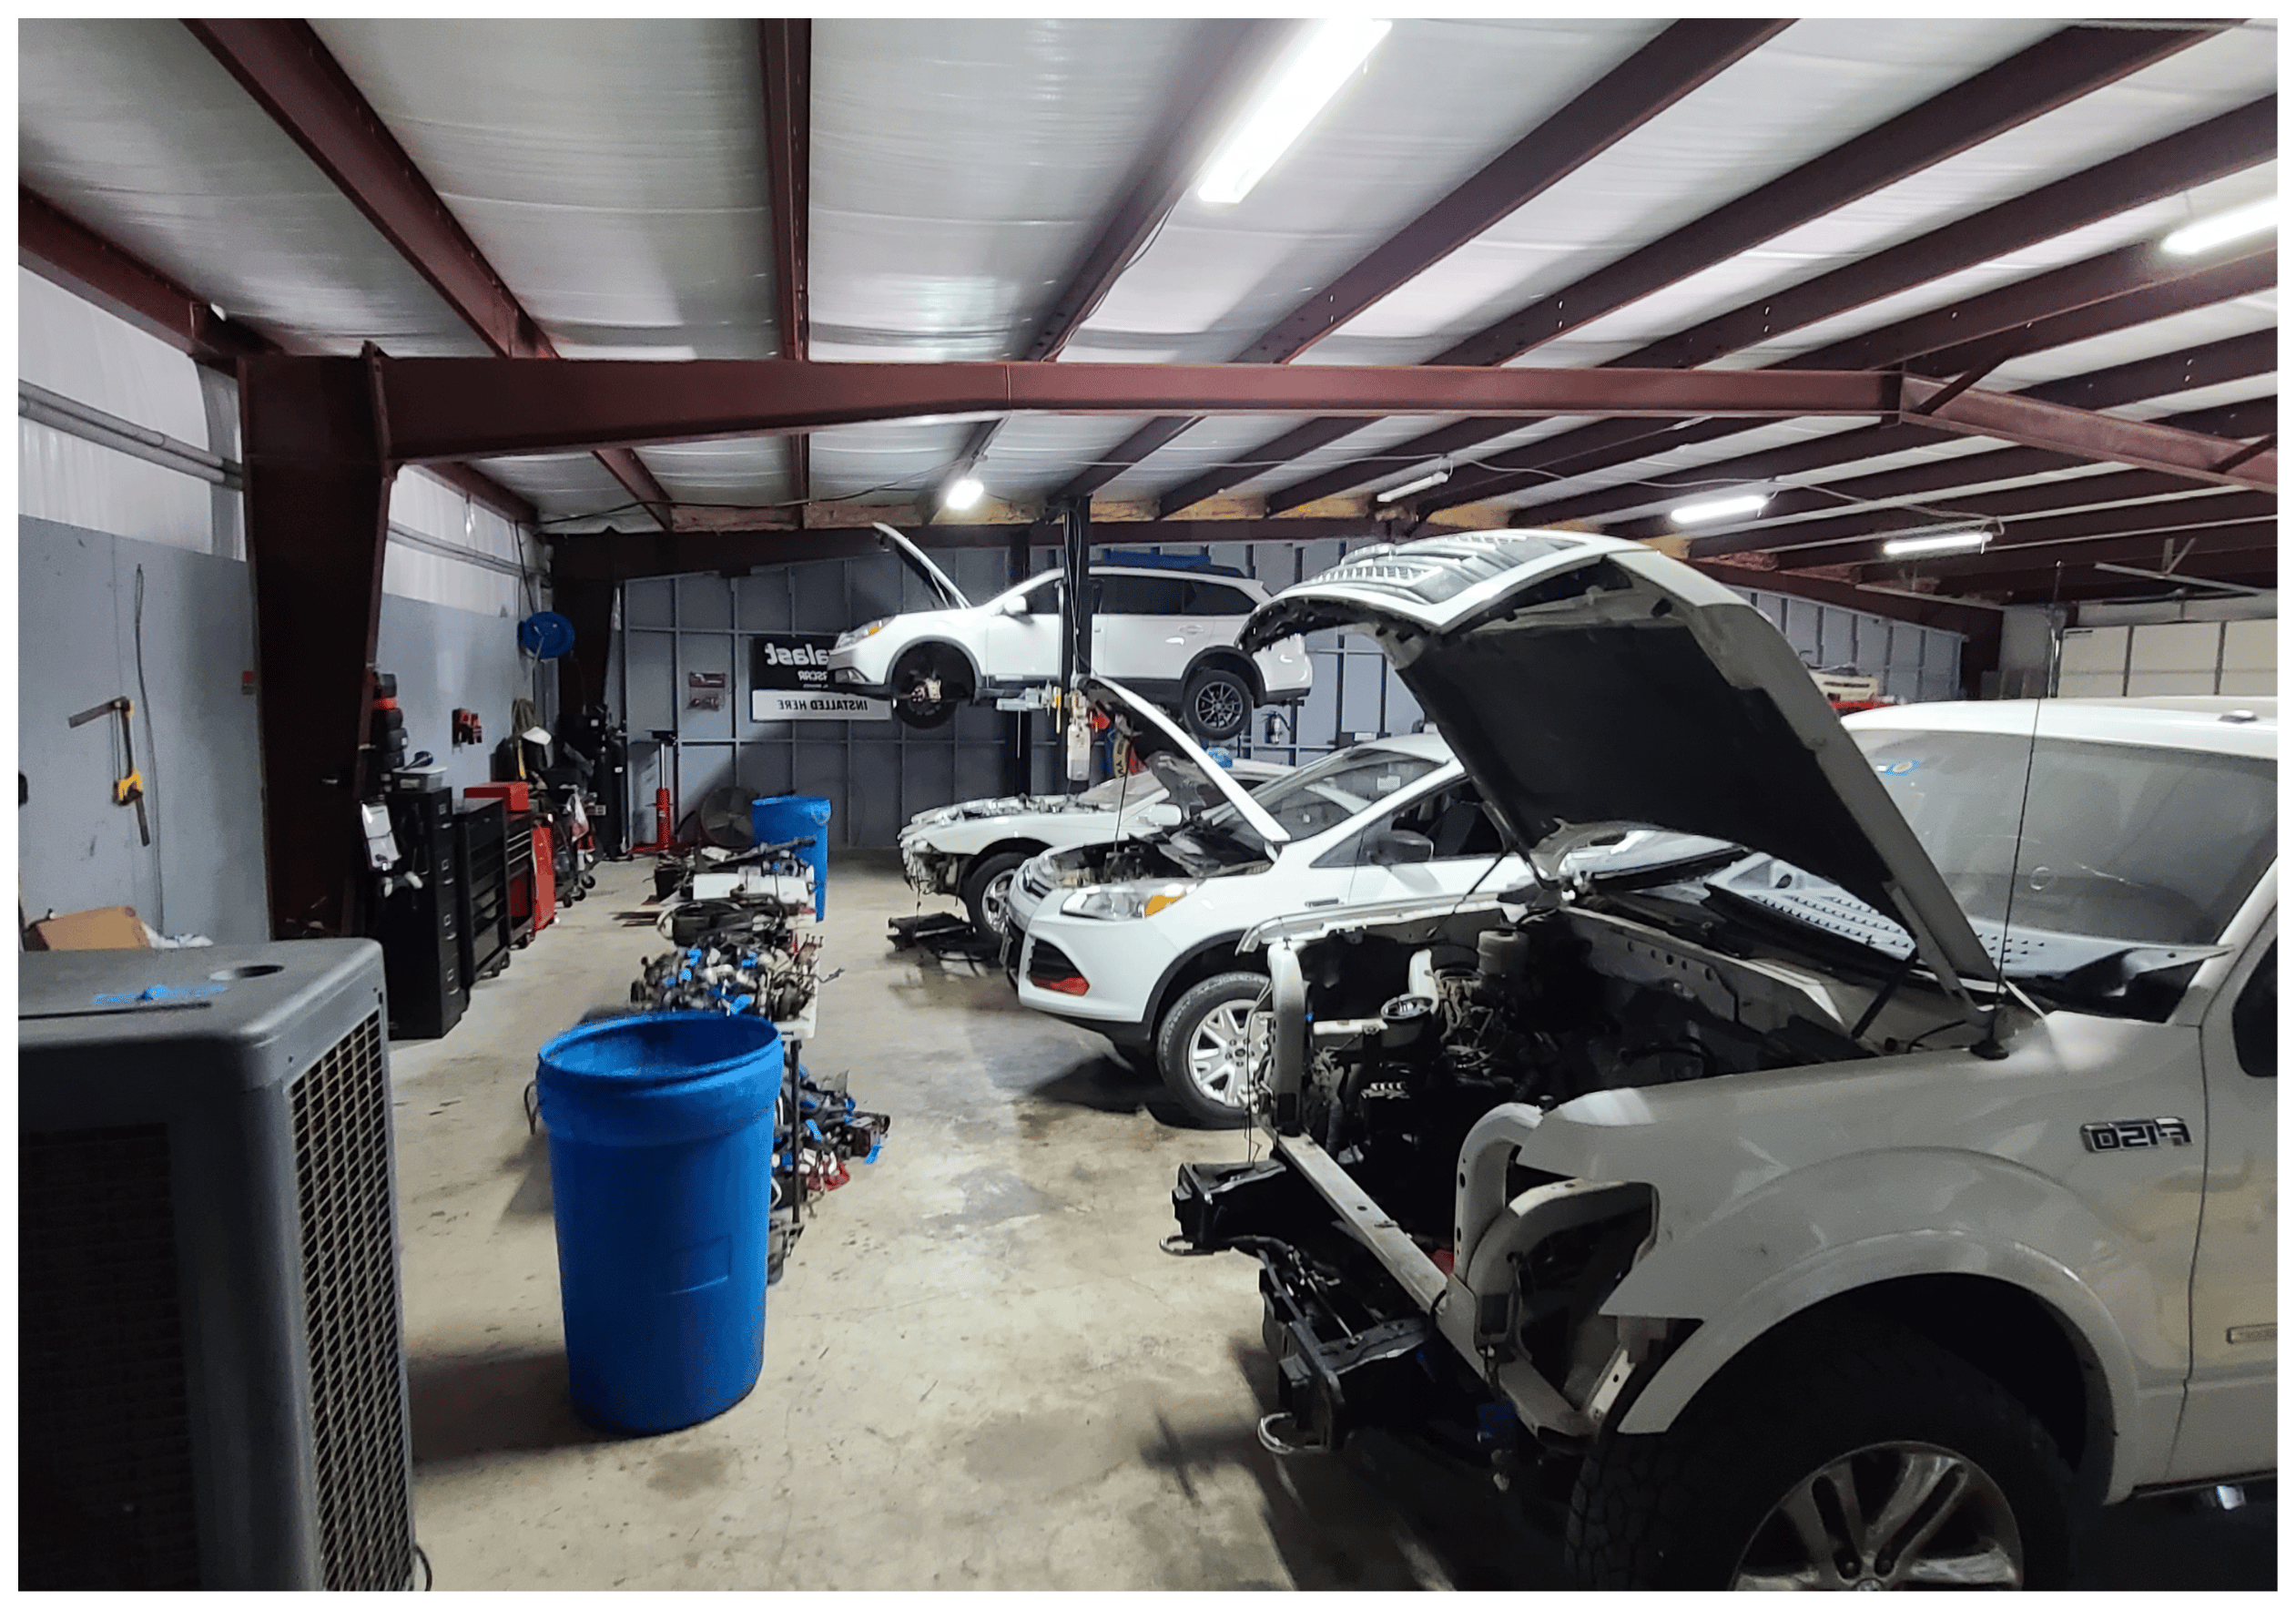 Inside Brittni's Automotive shop. Four white cars ar eline on the right side for auto repairs, with equipment found on the left side.